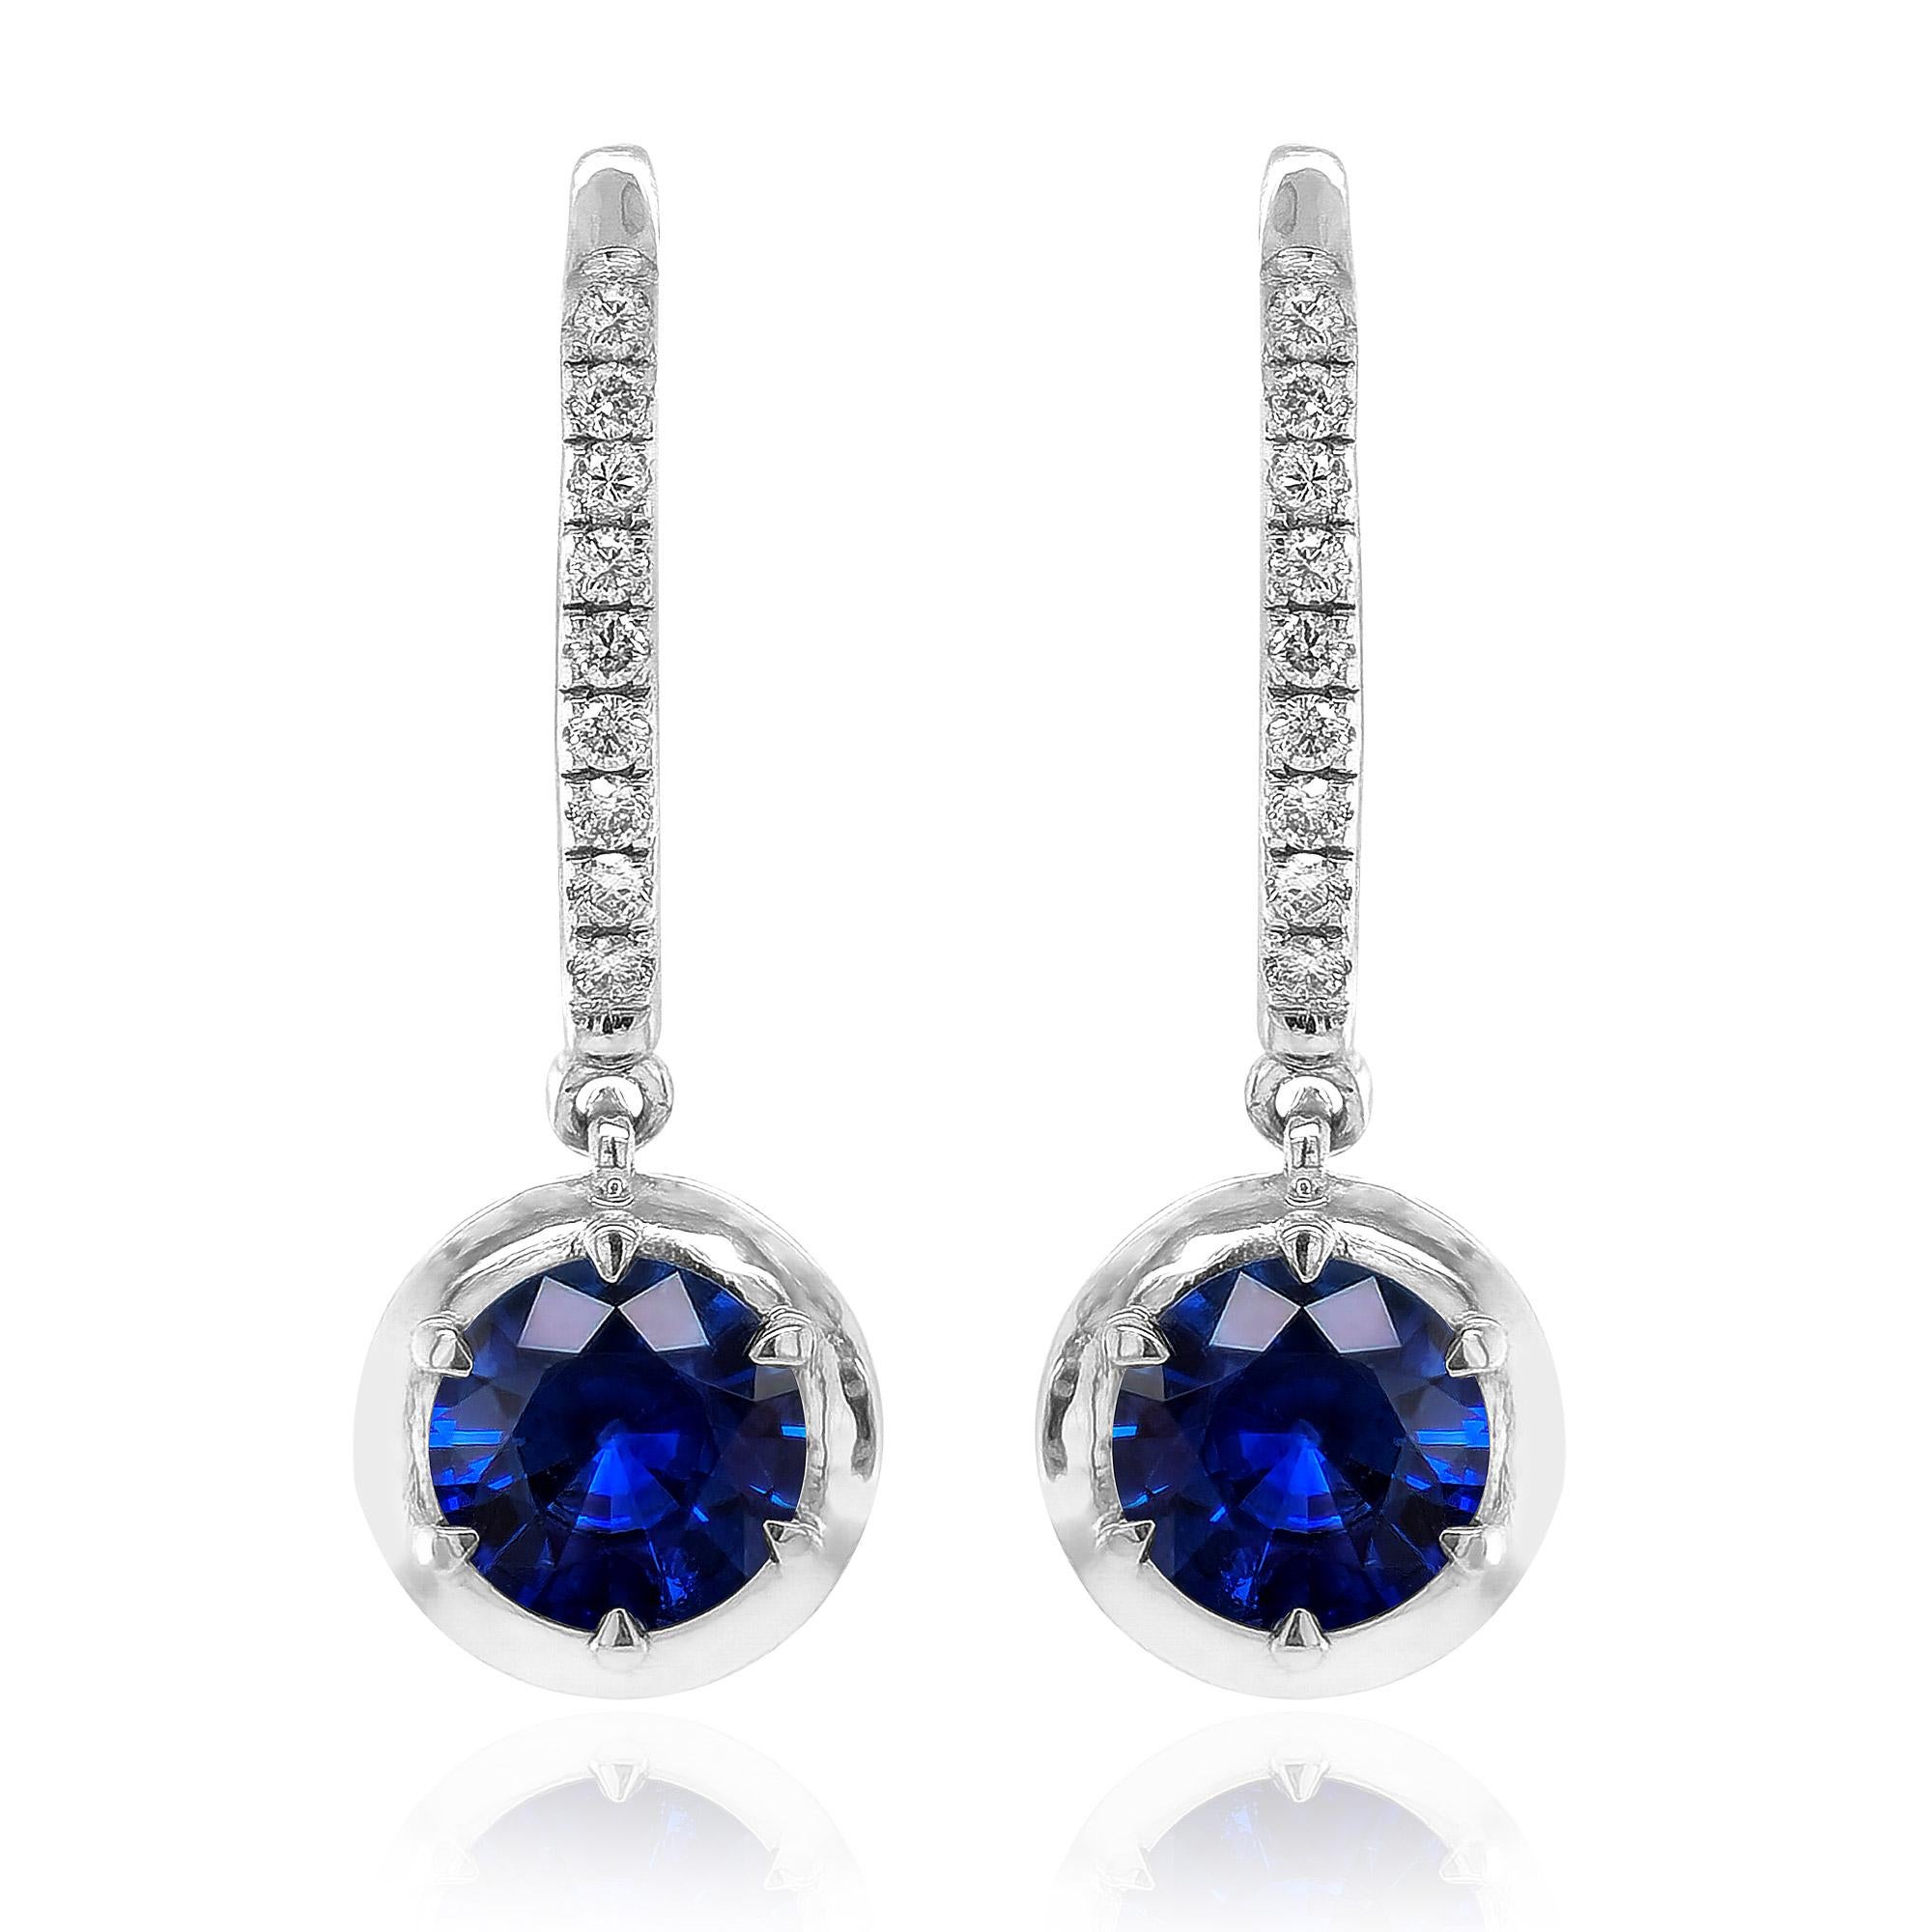 These 'Eyes of the Ocean' rare Blue Sapphire earrings are elegantly placed in a beautifully textured white gold setting. 2.60 carats Rare Blue Sapphire Earrings are brilliantly set with 14K White Gold, creating tremendous contrast between the luster